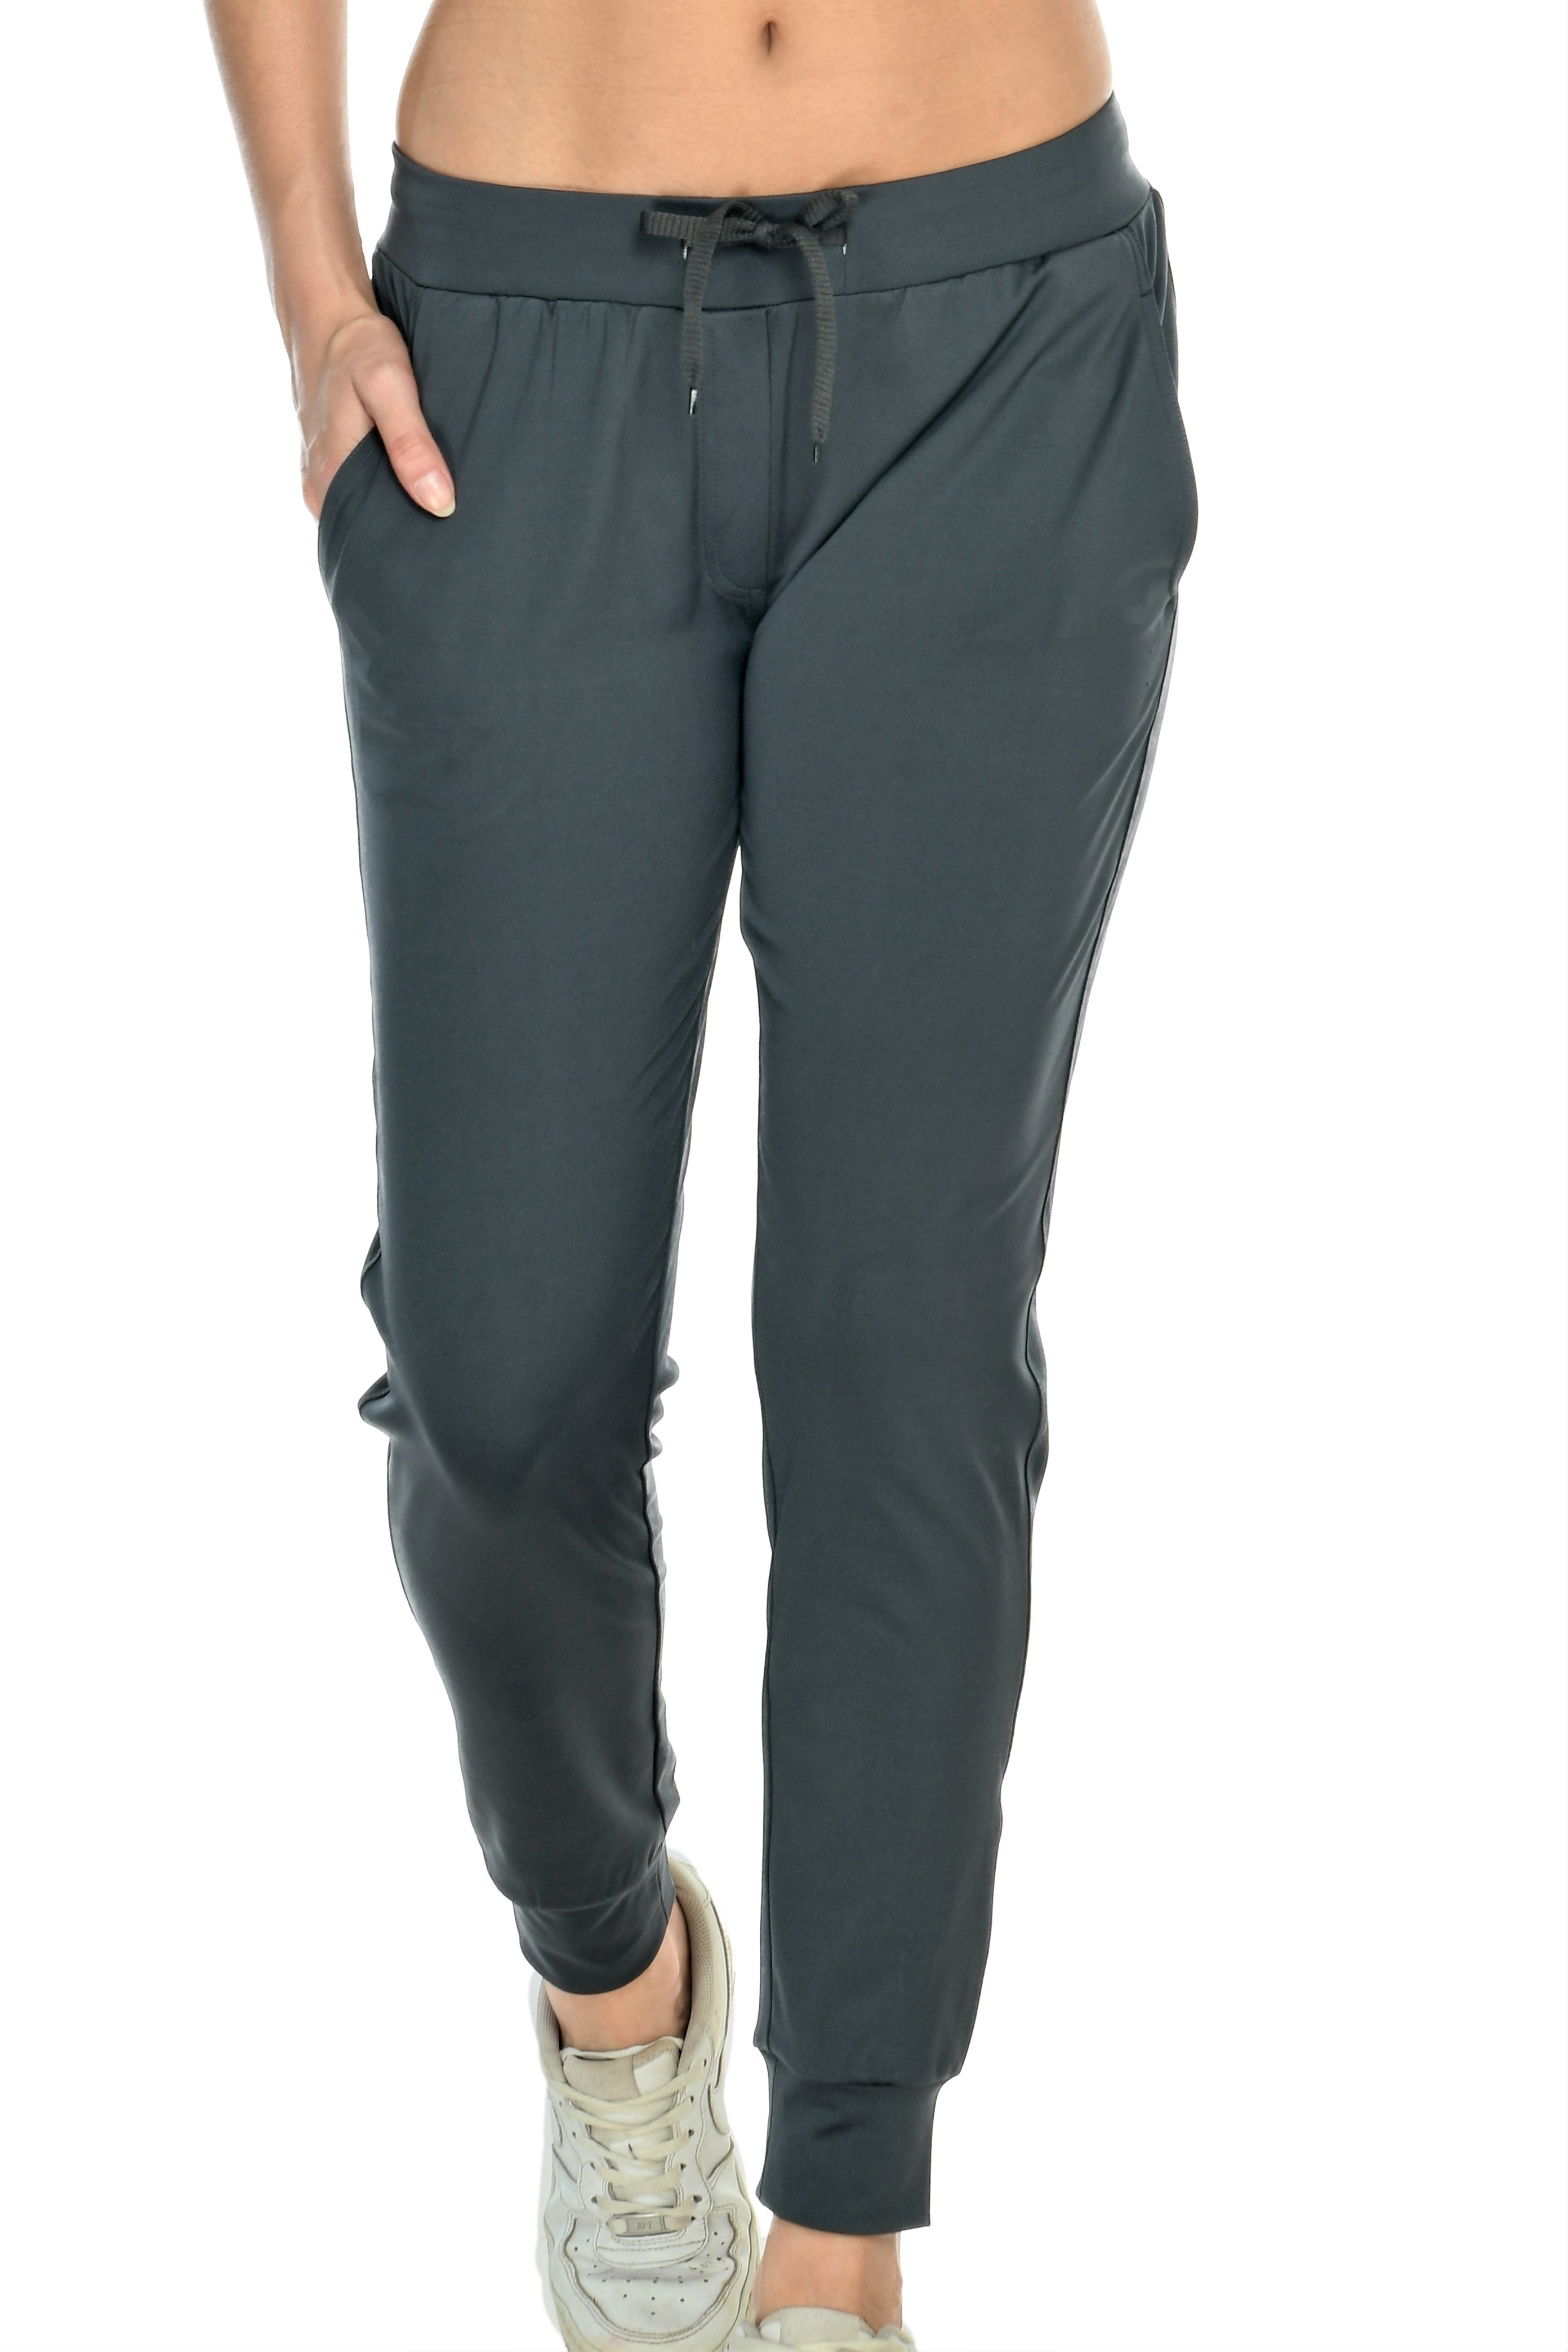 Body Smith Women's Solid Grey Relax Jogger